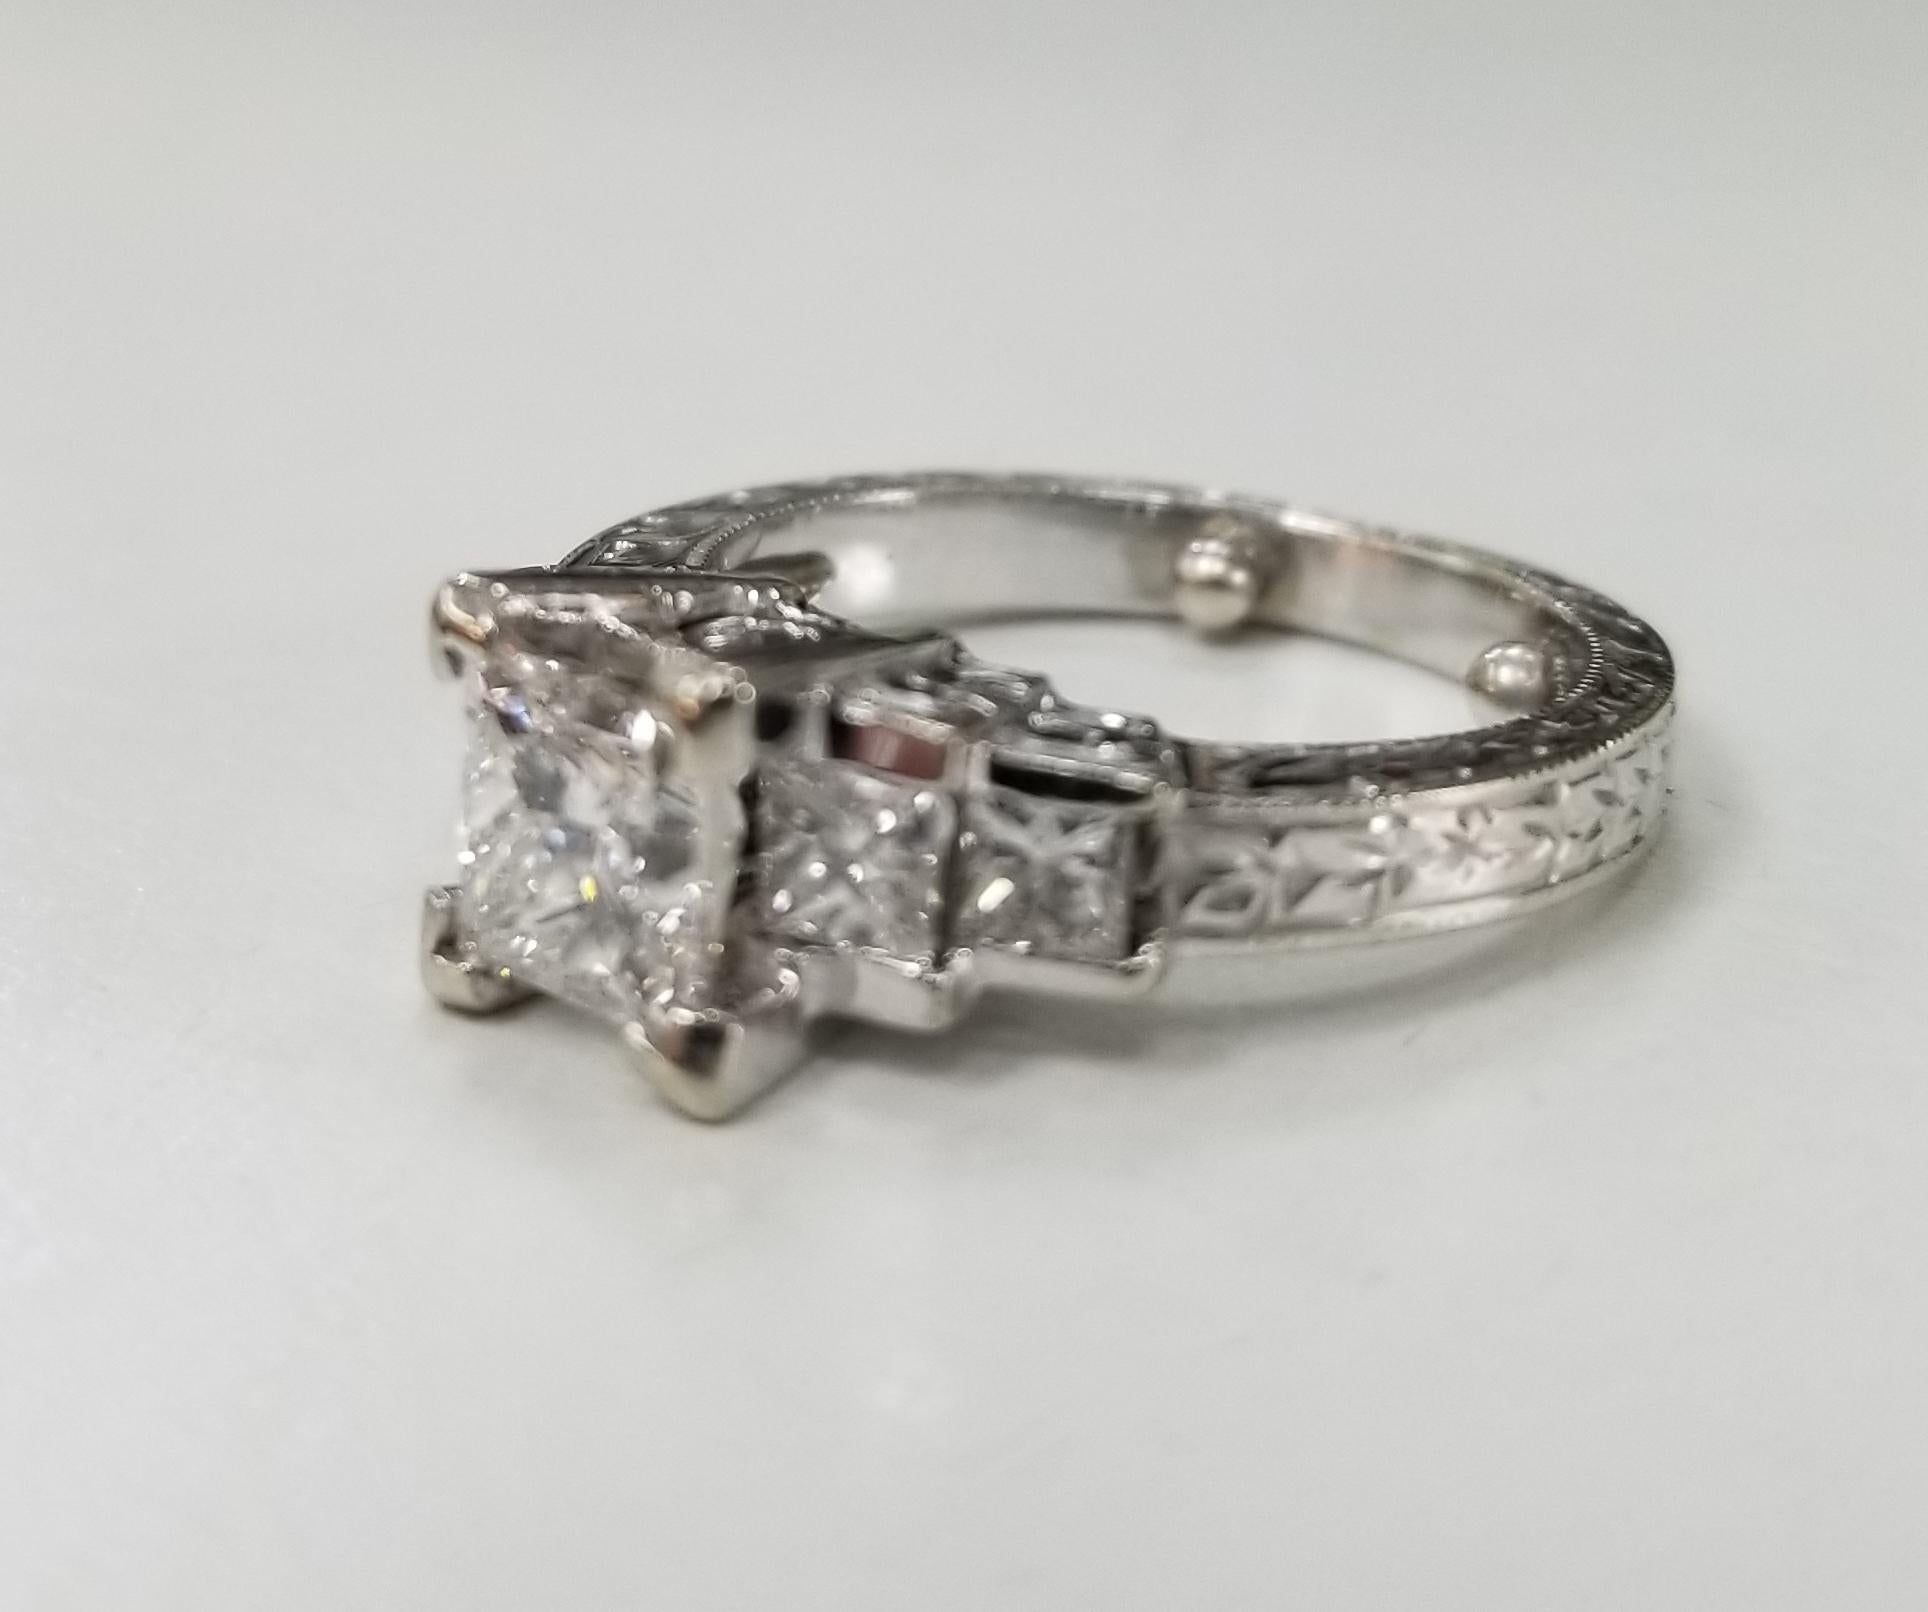 18k white gold hand engraved diamond princess cut ring, containing 1 princess cut diamond; color G, clarity SI and weight .80cts. also 4 princess cut diamonds of very fine quality weighing .50pts. ring size is a 6 and can be sized to fit for free.